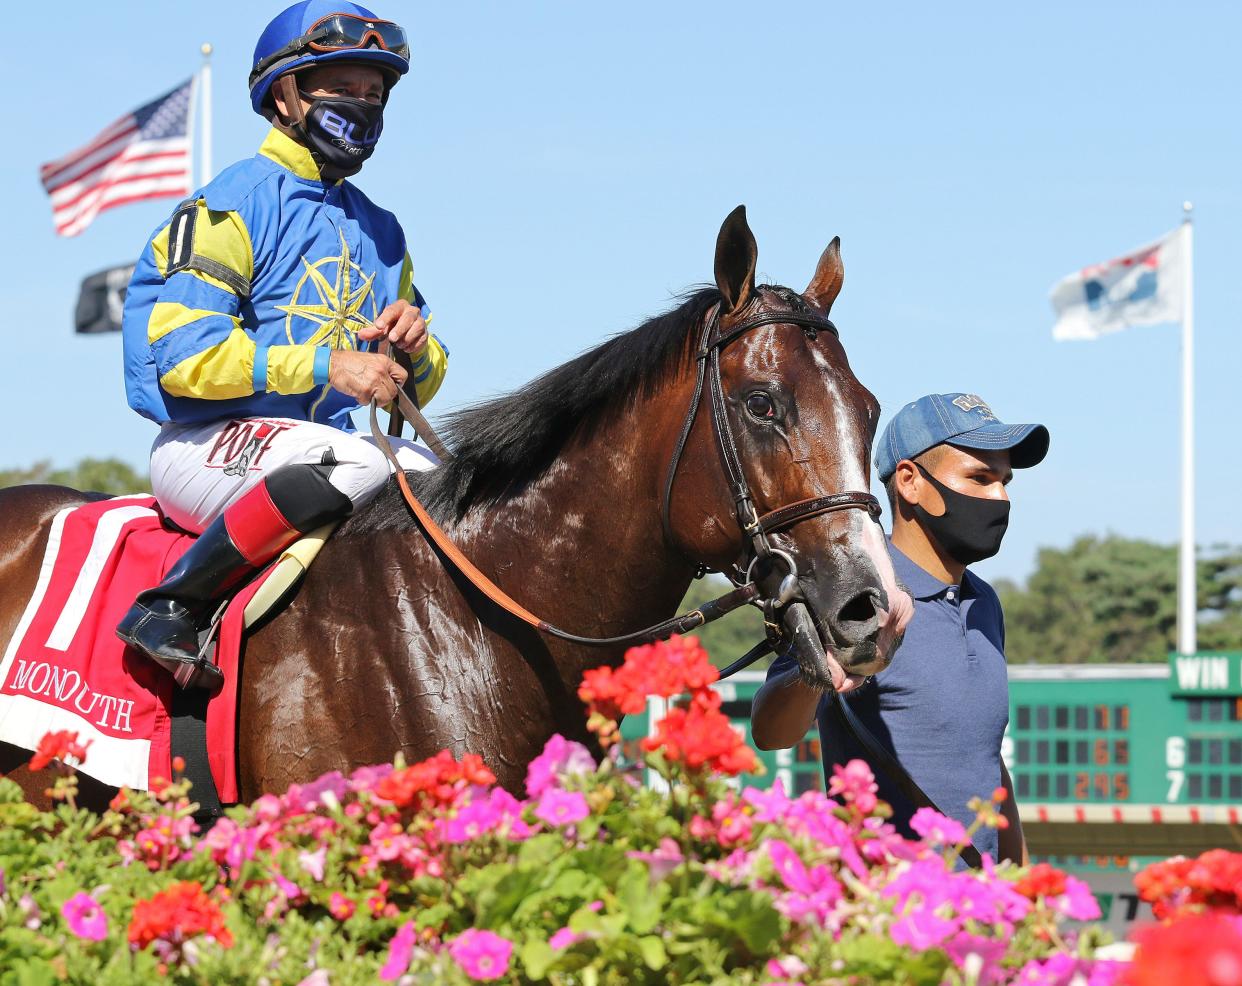 Analyze It, with Joe Bravo riding, won the $150,000 Grade III Red Bank Stakes at Monmouth Park Racetrack in Oceanport, N.J. on Saturday September 5, 2020.